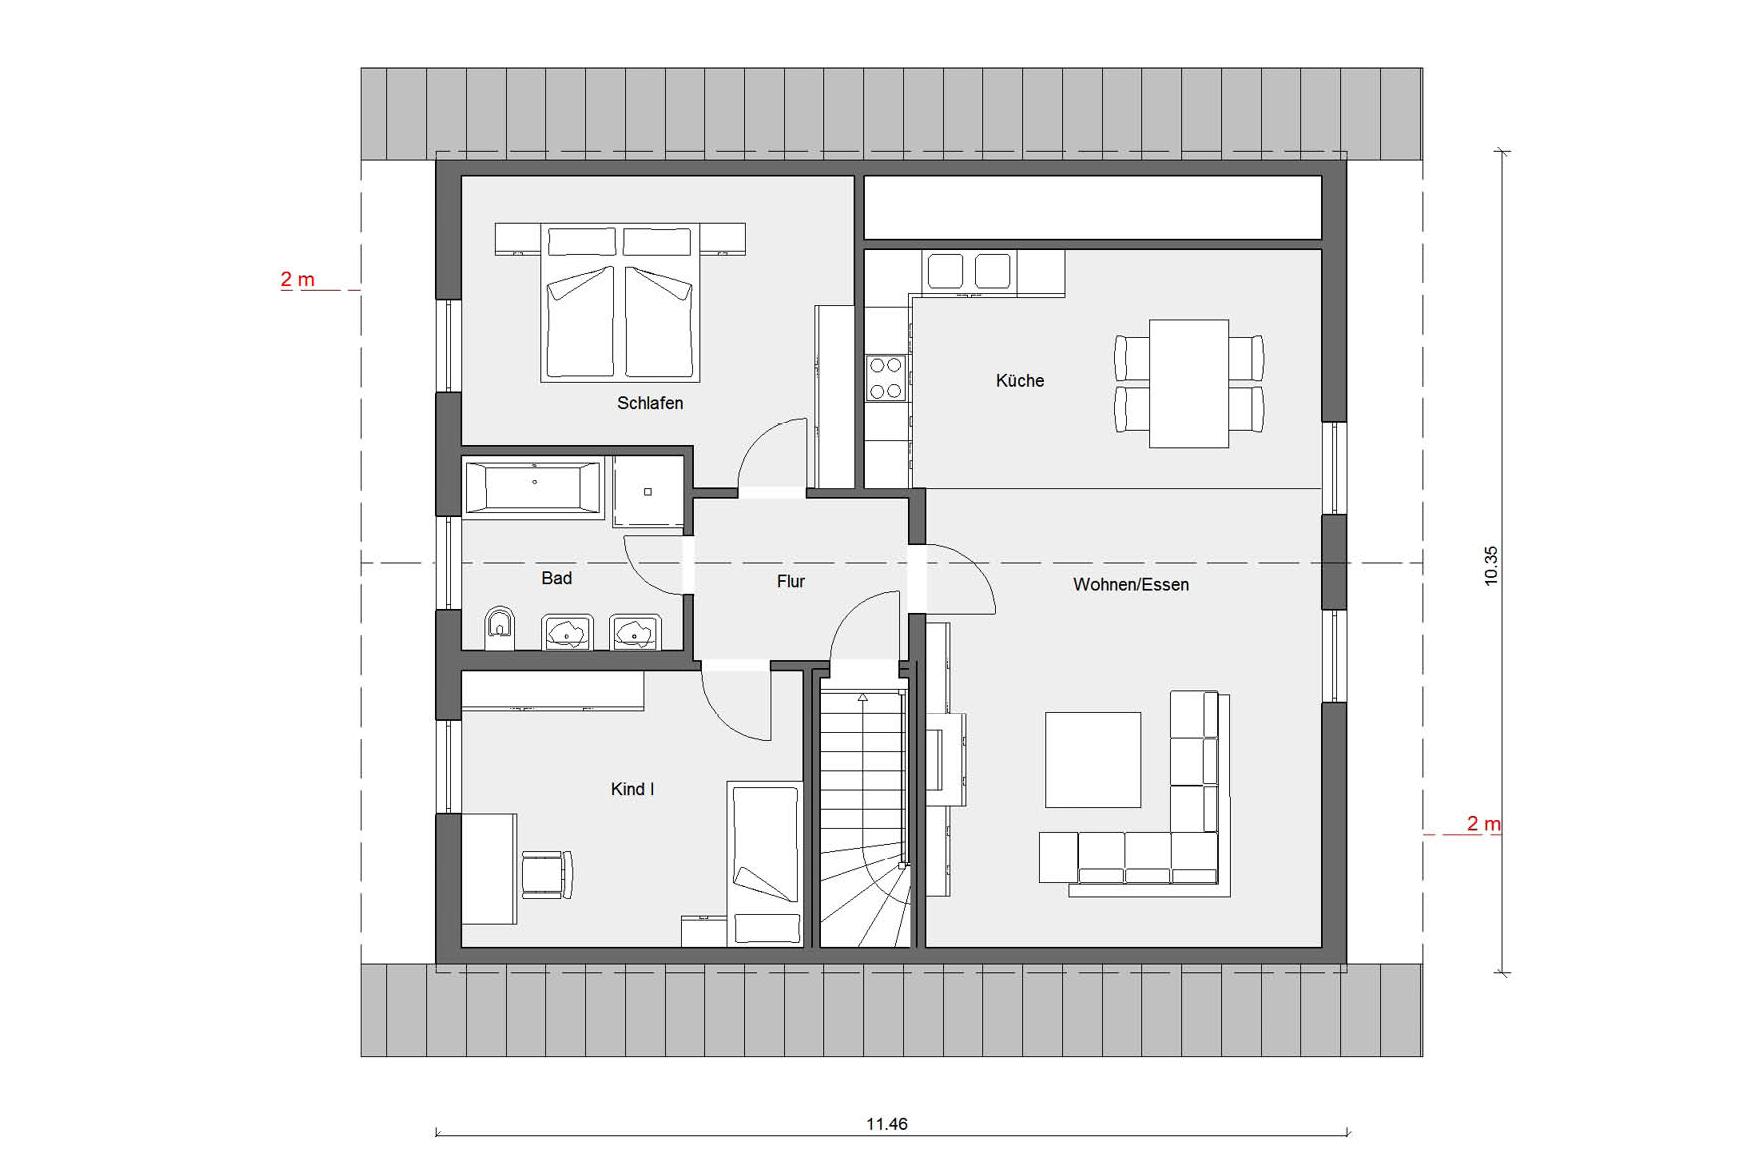 Floor plan penthouse M 15-199.2 two-family house